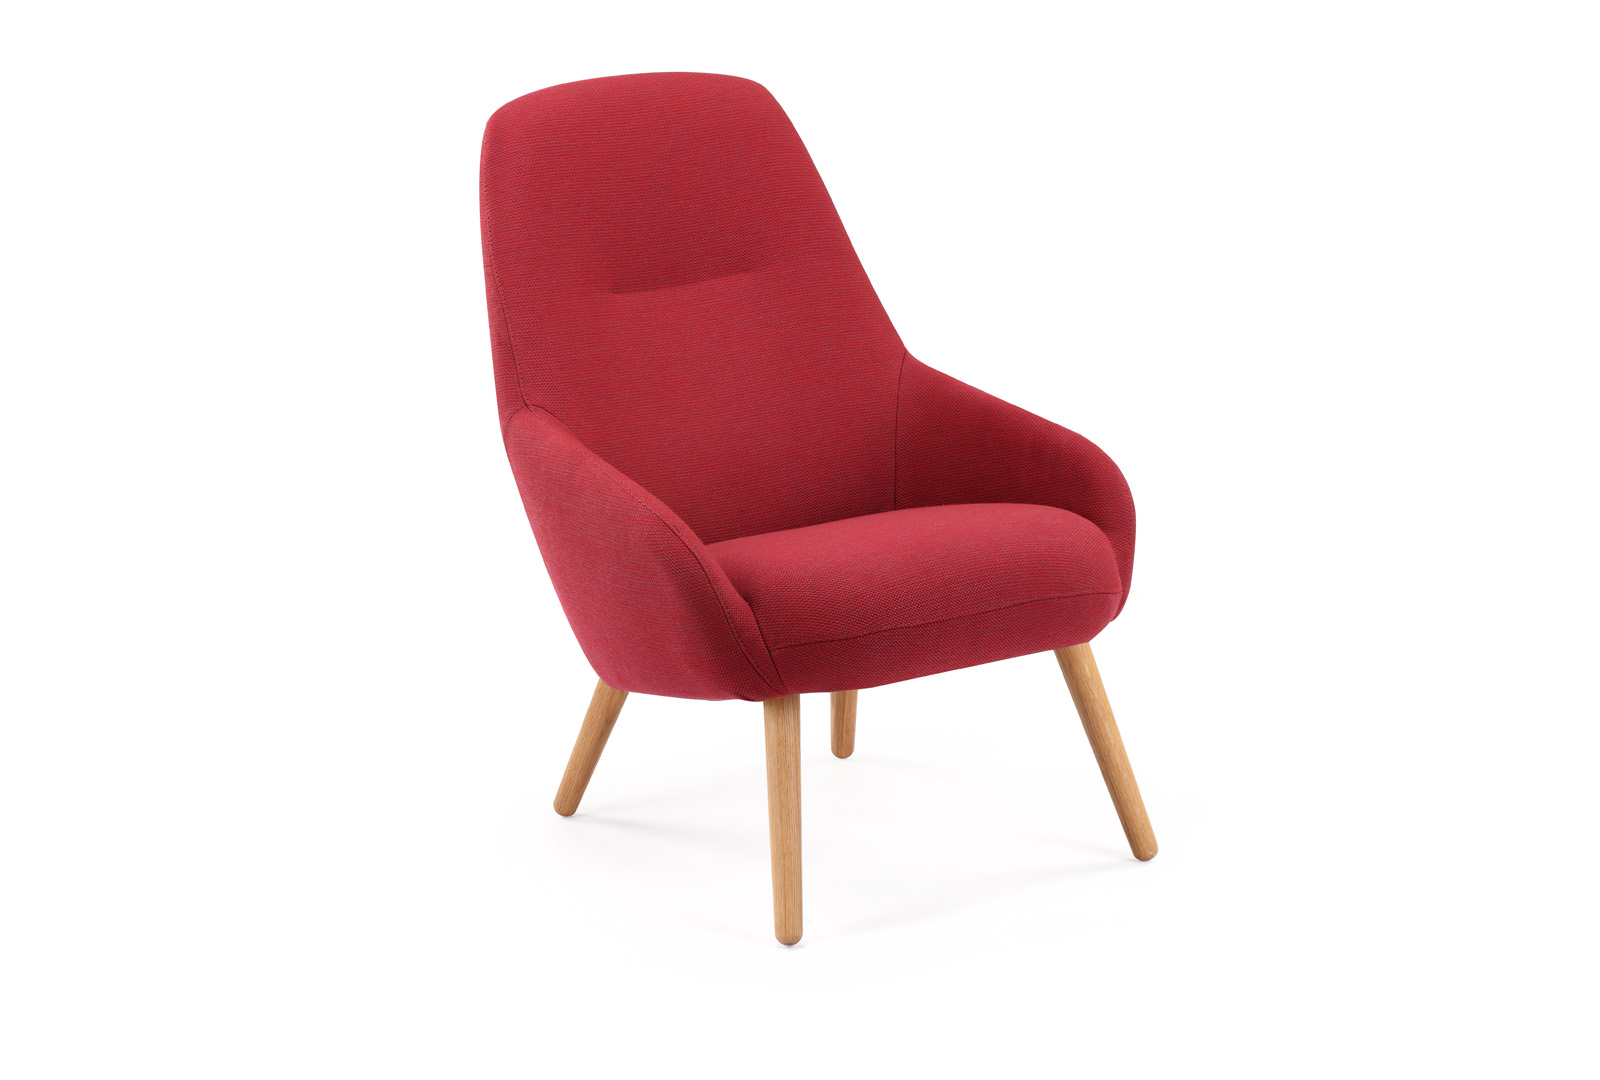 TRACE WOOD RED CHAIR